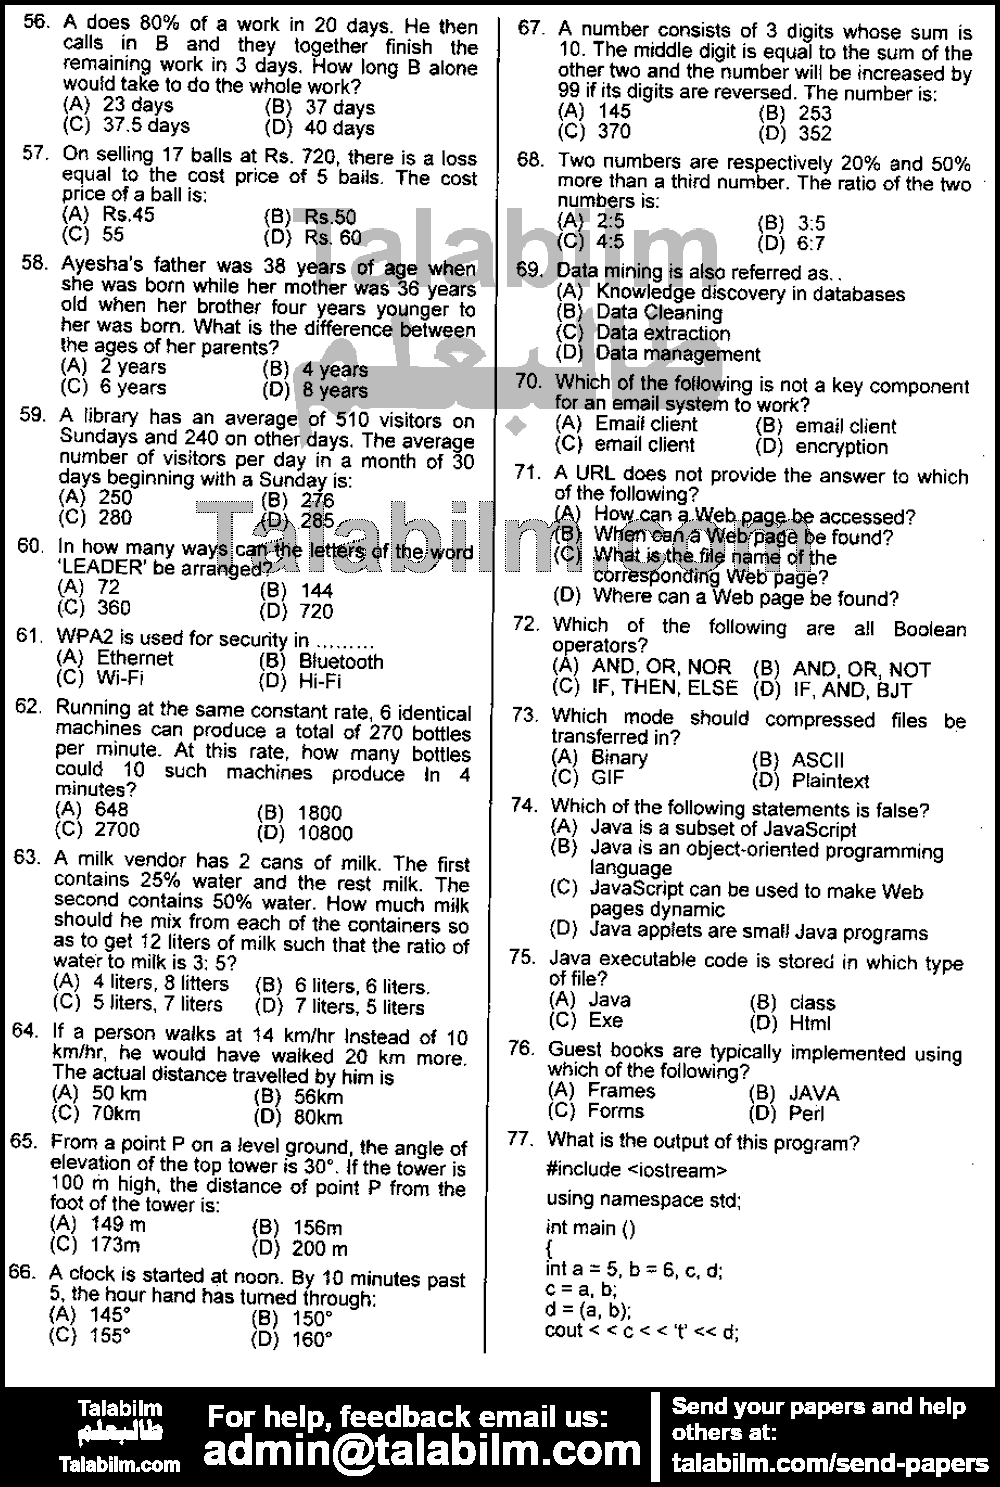 Computer Programmer Or Data Control Officer 0 past paper for 2015 Page No. 4